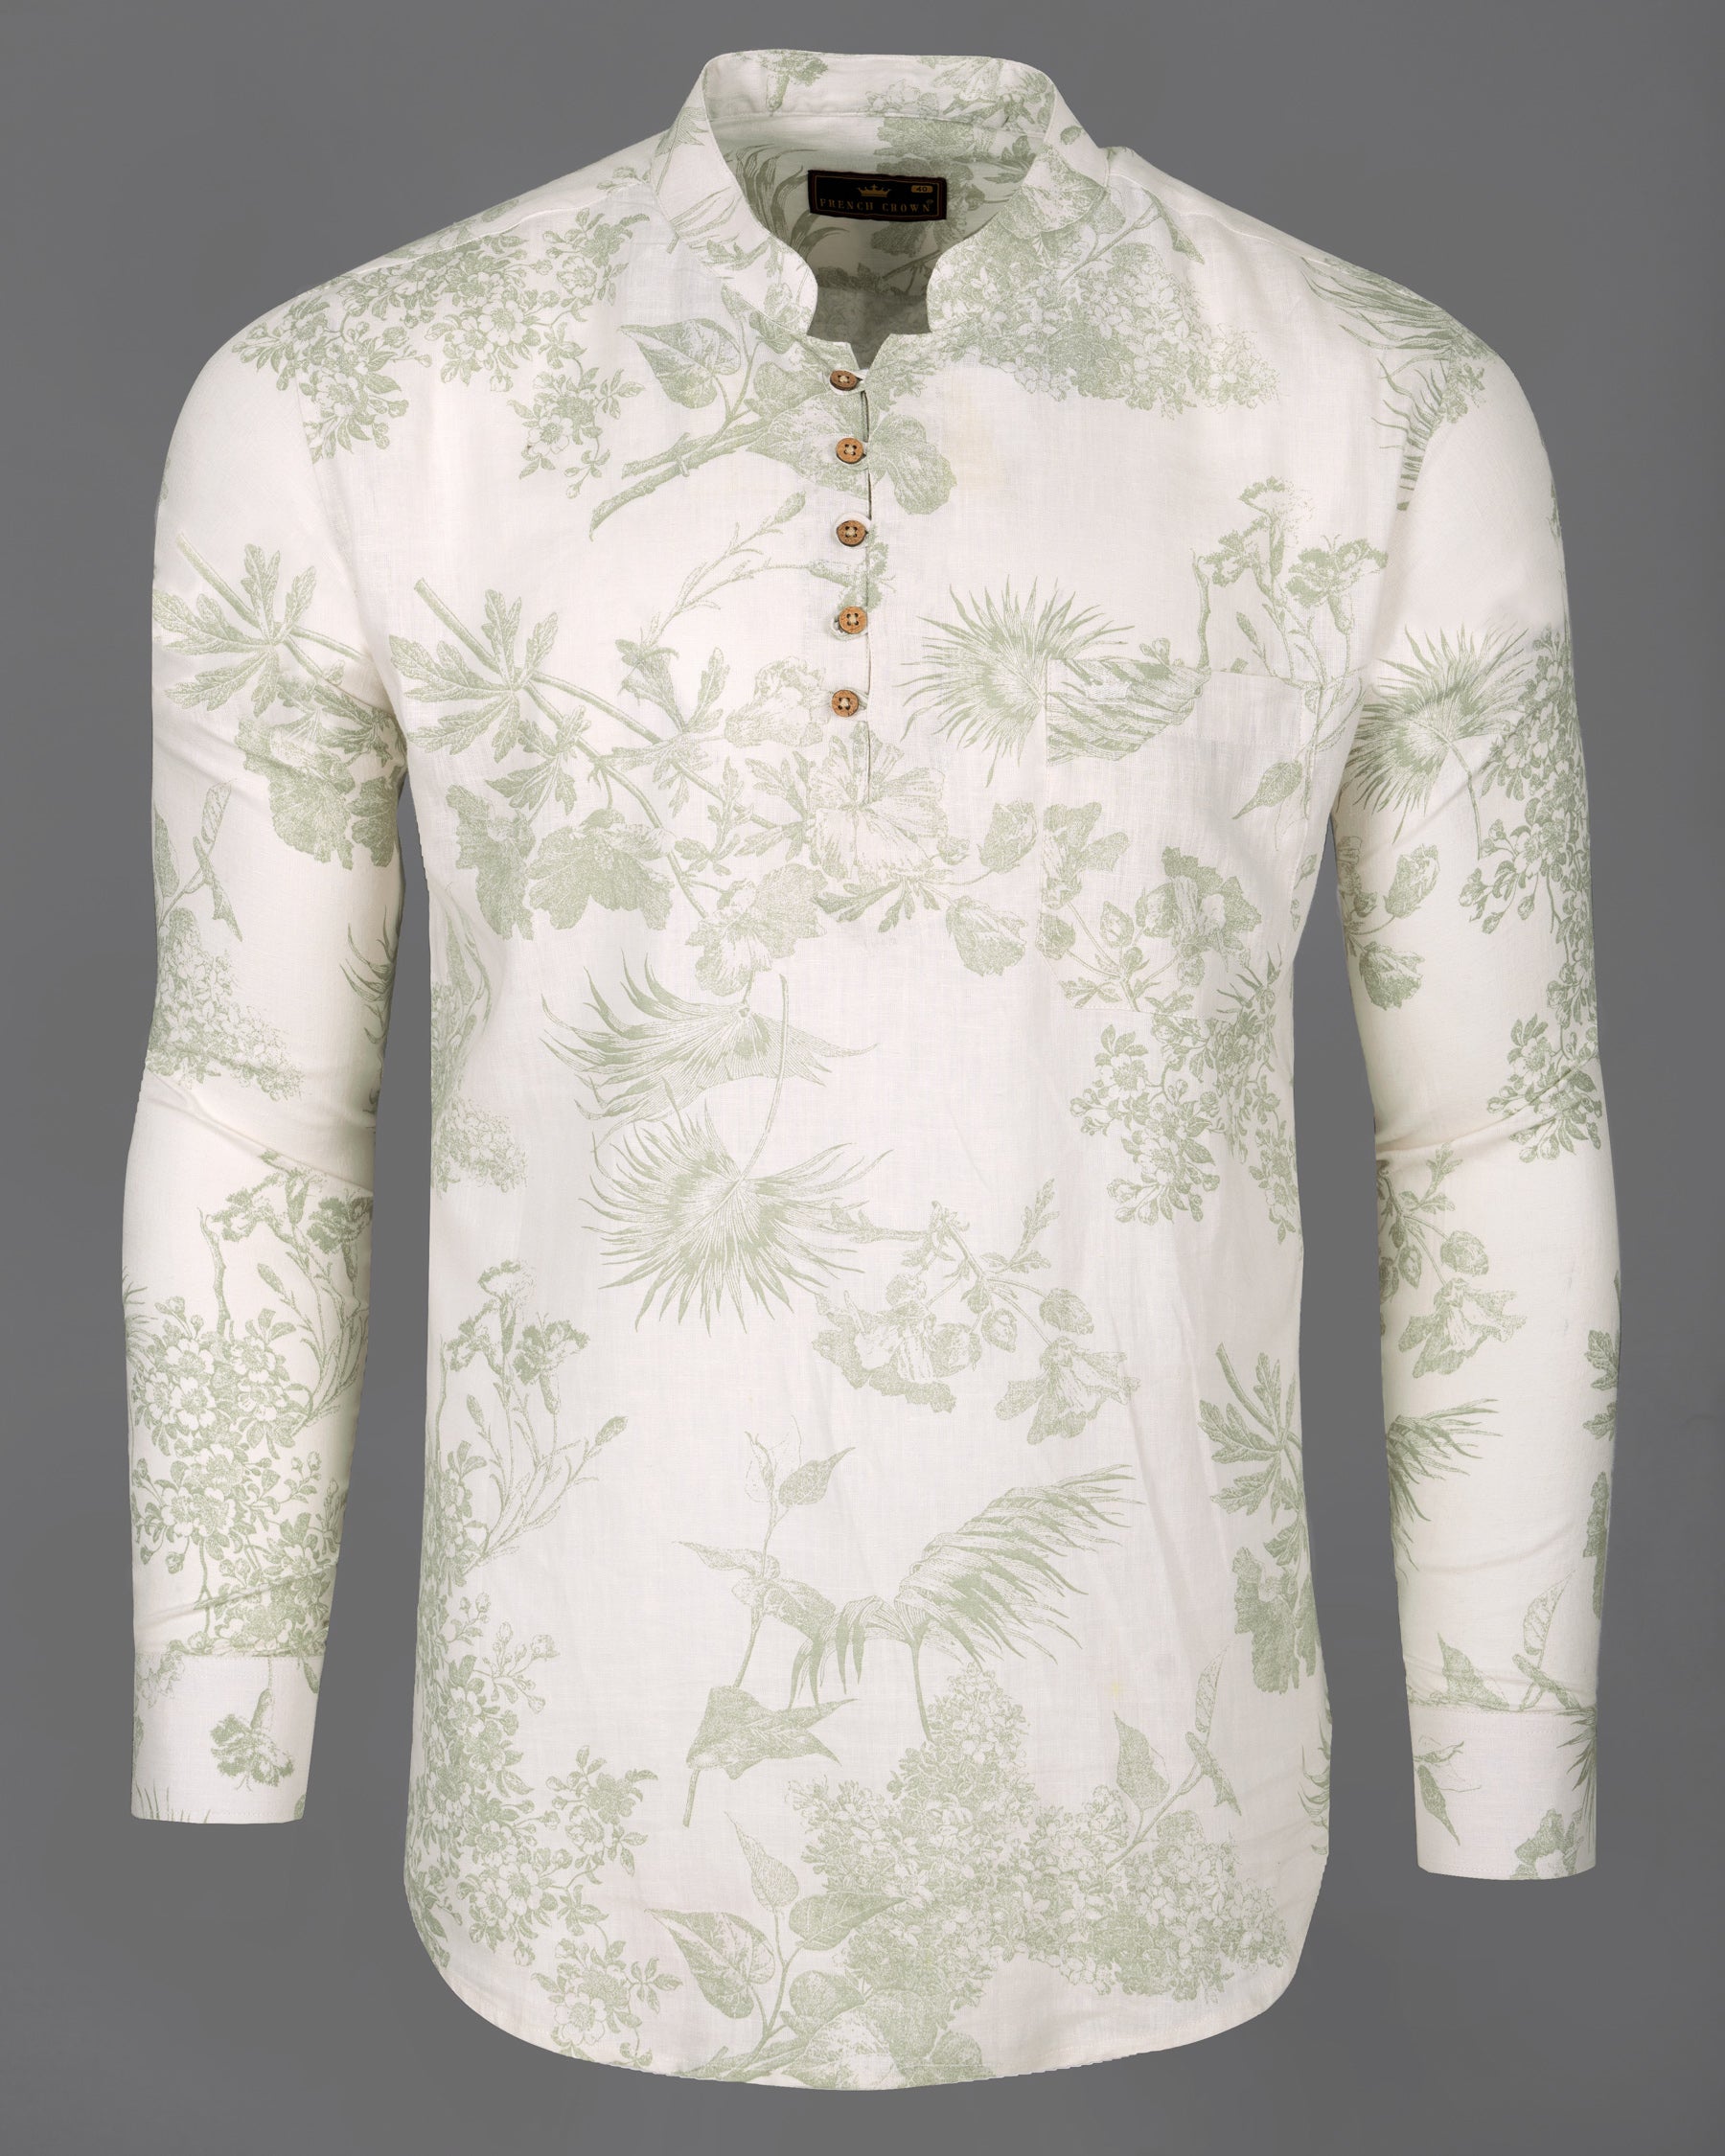 off white with Green Leaves Printed Luxurious Linen Kurta Shirt 5153-KS-38, 5153-KS-H-38, 5153-KS-39, 5153-KS-H-39, 5153-KS-40, 5153-KS-H-40, 5153-KS-42, 5153-KS-H-42, 5153-KS-44, 5153-KS-H-44, 5153-KS-46, 5153-KS-H-46, 5153-KS-48, 5153-KS-H-48, 5153-KS-50, 5153-KS-H-50, 5153-KS-52, 5153-KS-H-52